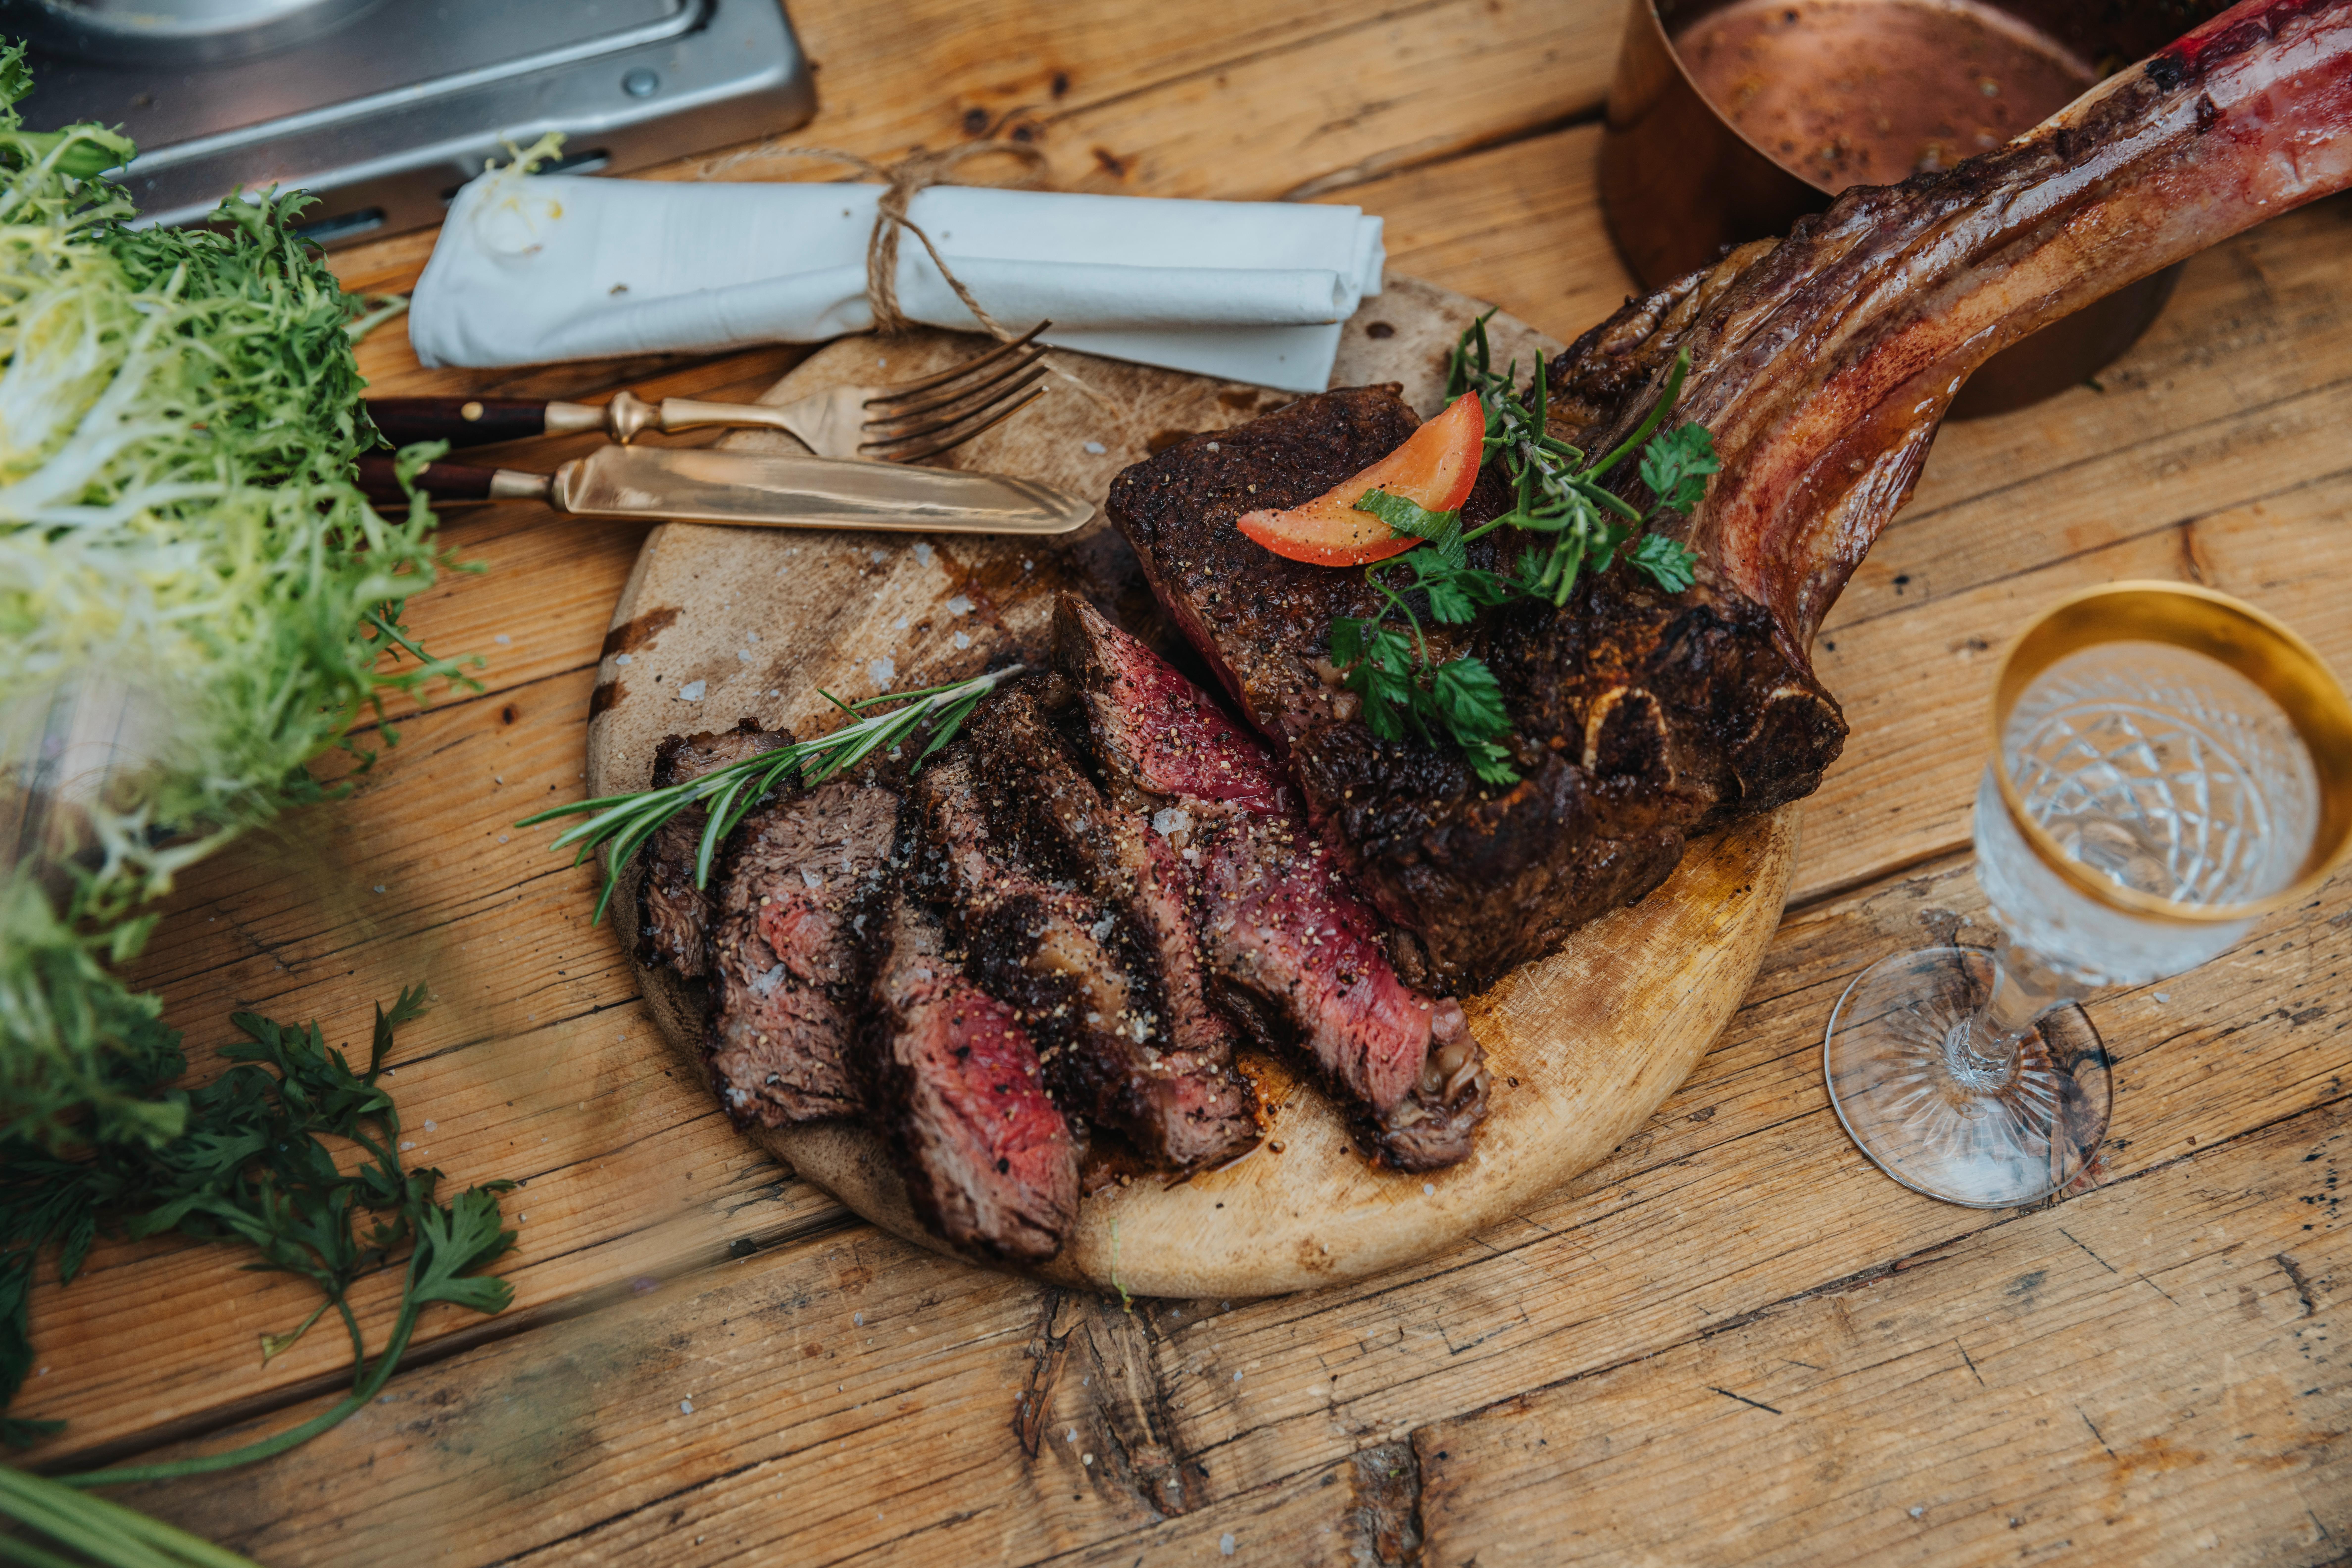 Whole grilled and seasoned tomahawk steak on wooked board, Koeln, NRW, Germany